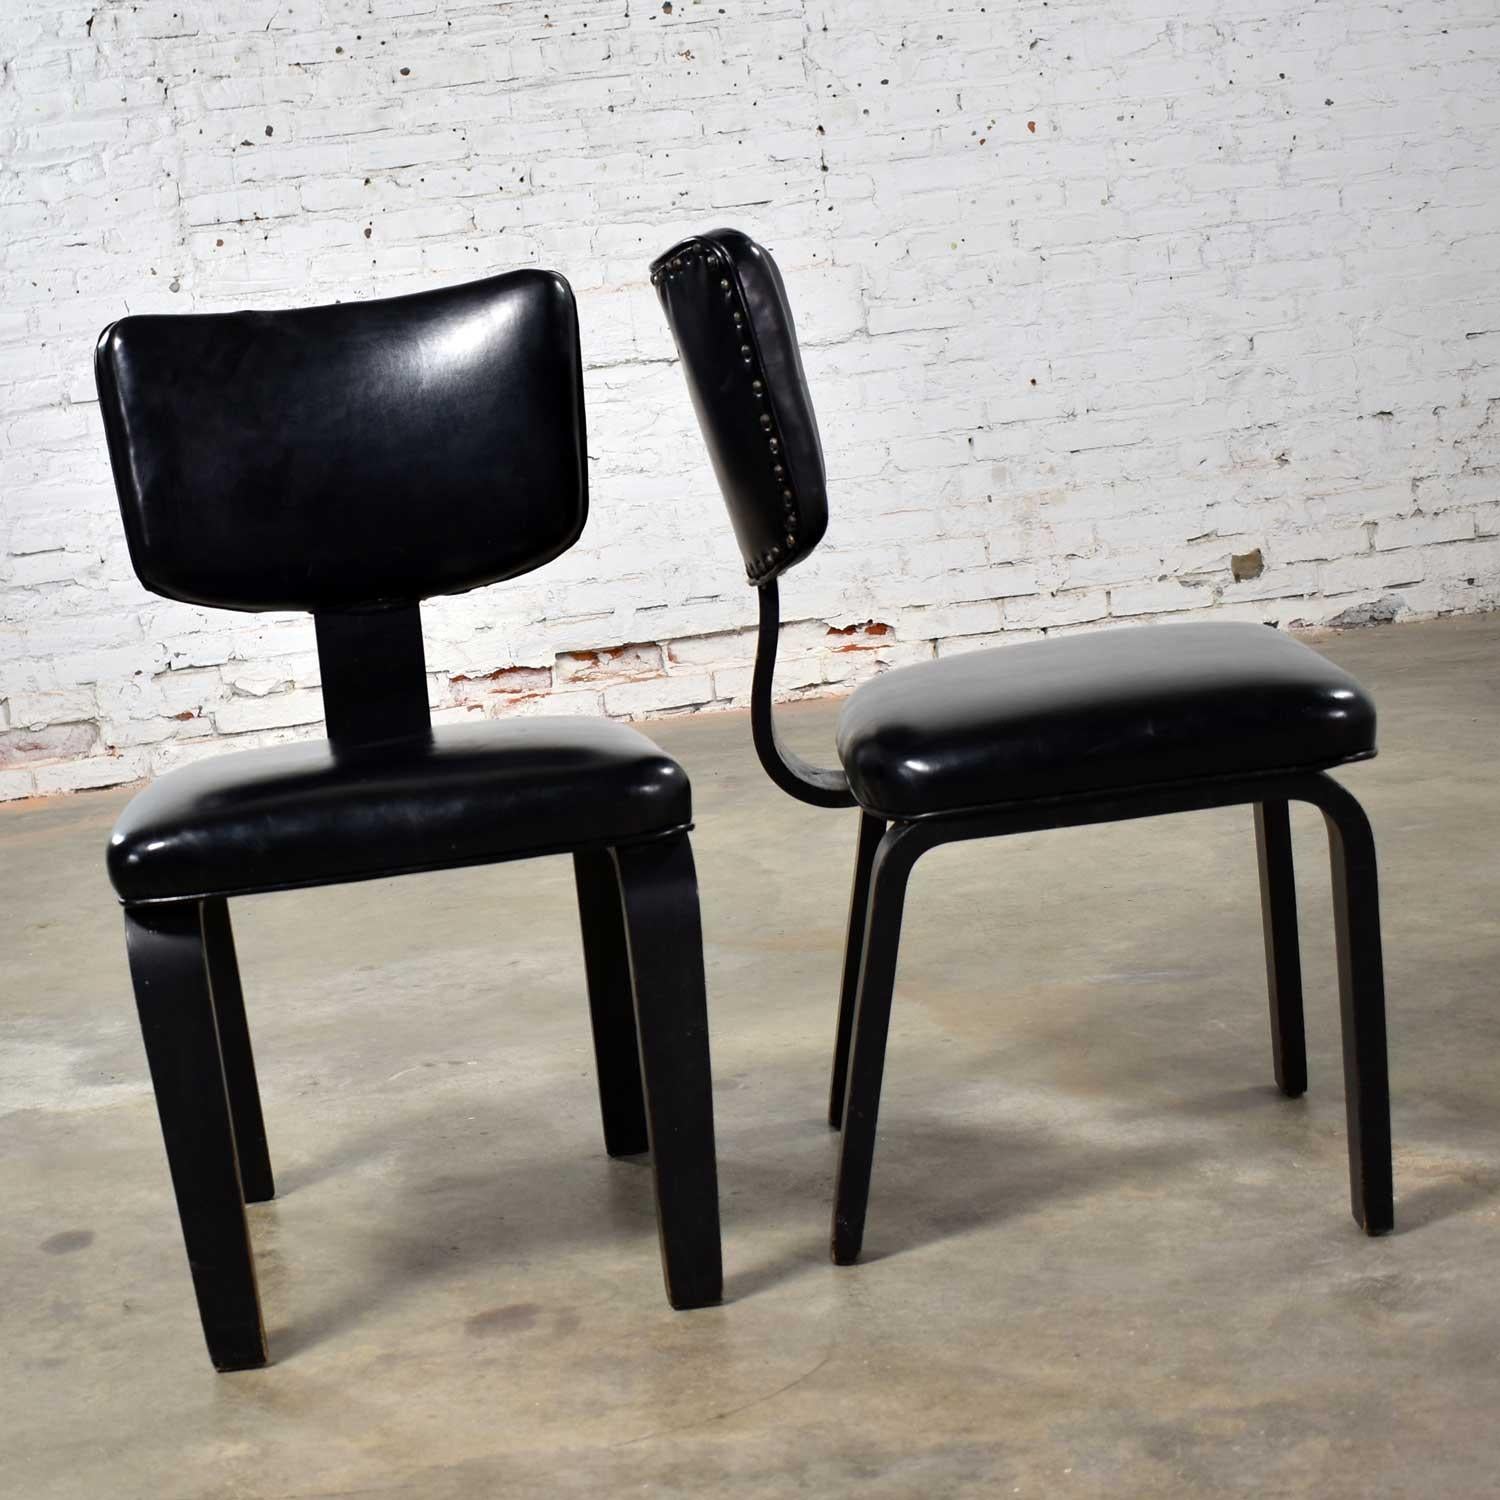 vinyl chairs for sale